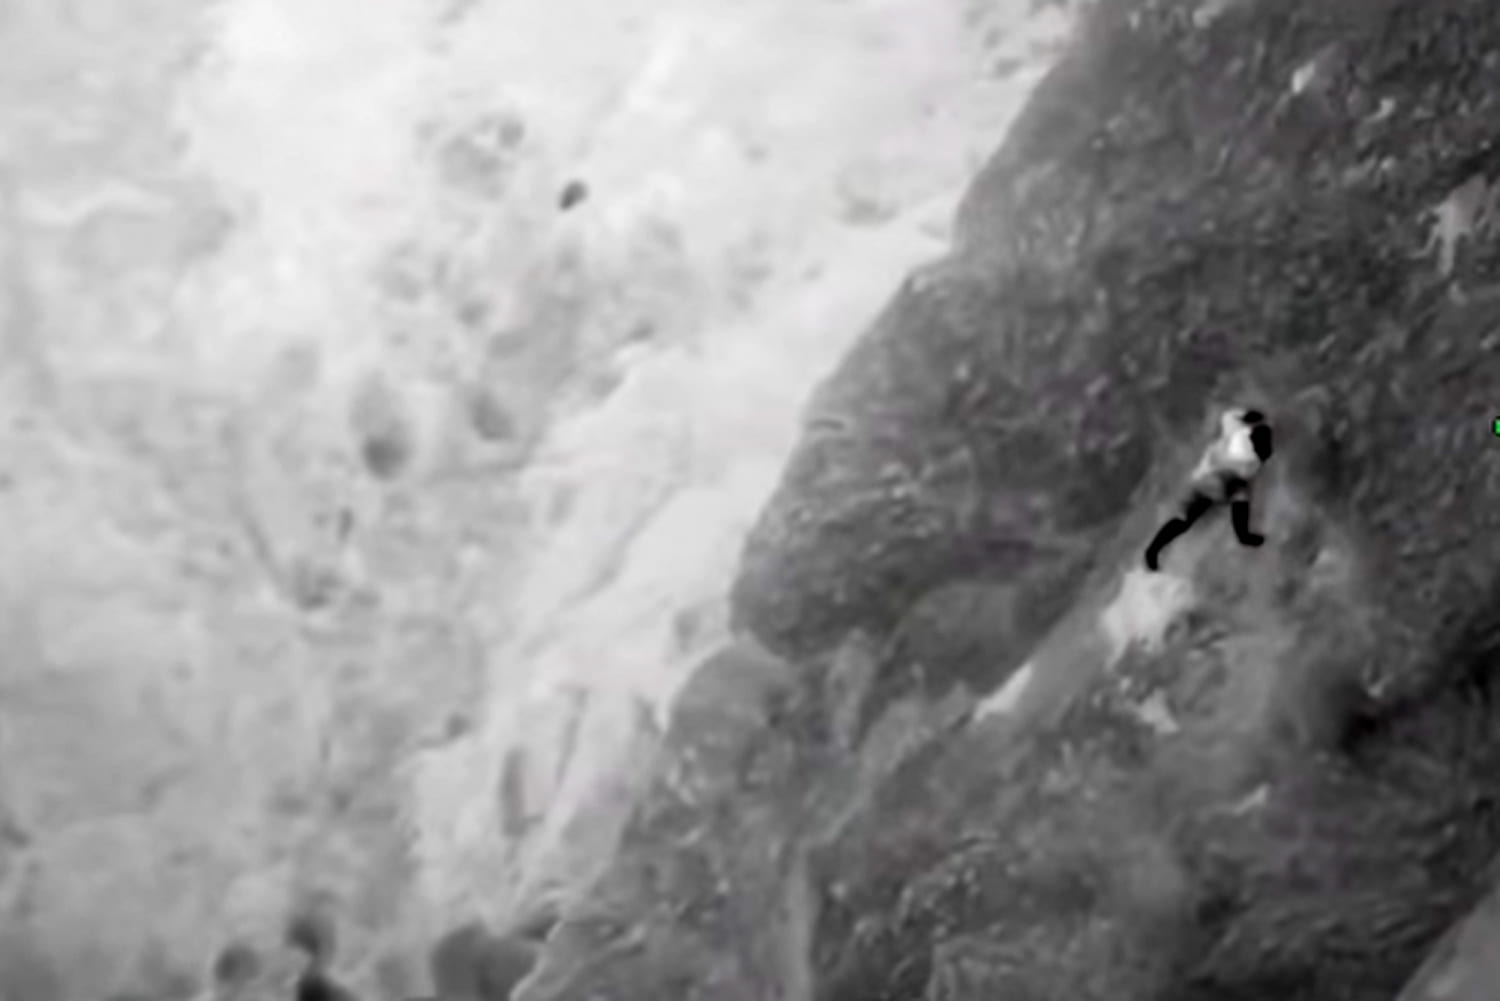 Video shows dramatic rescue of hiker clinging to side of California cliff as ocean rises below